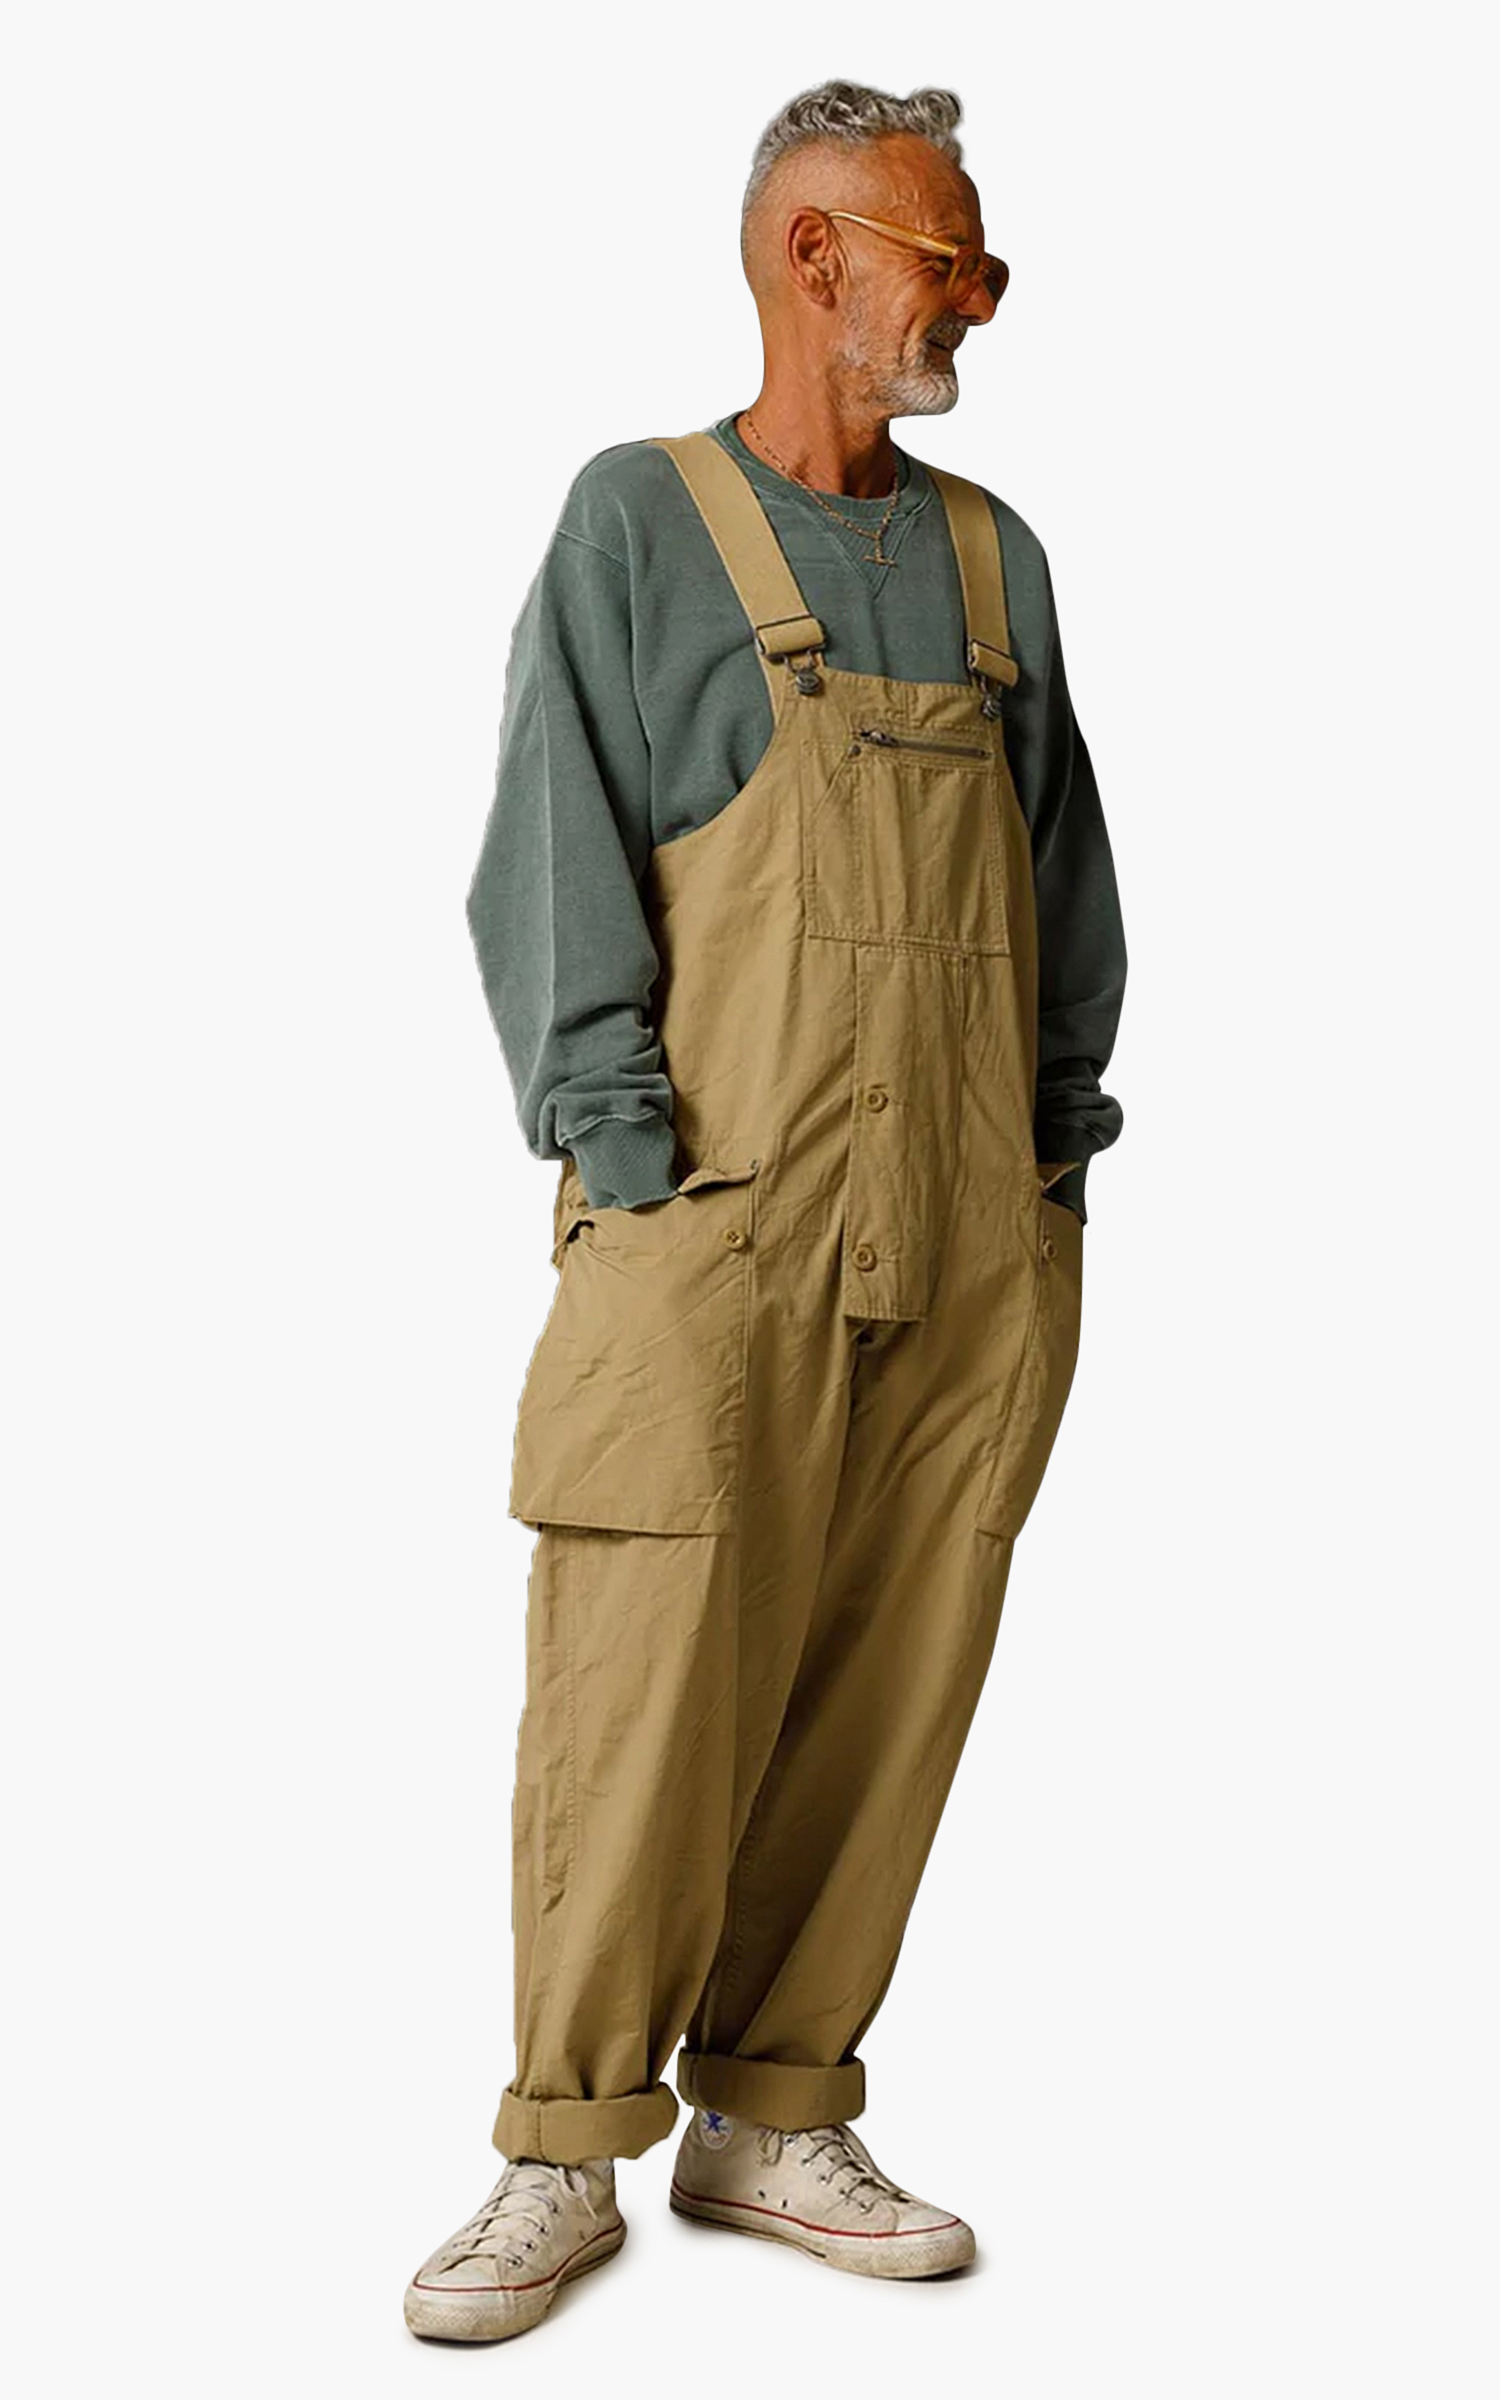 Nigel Cabourn Naval Dungaree Cotton Ripstop Tan | Cultizm